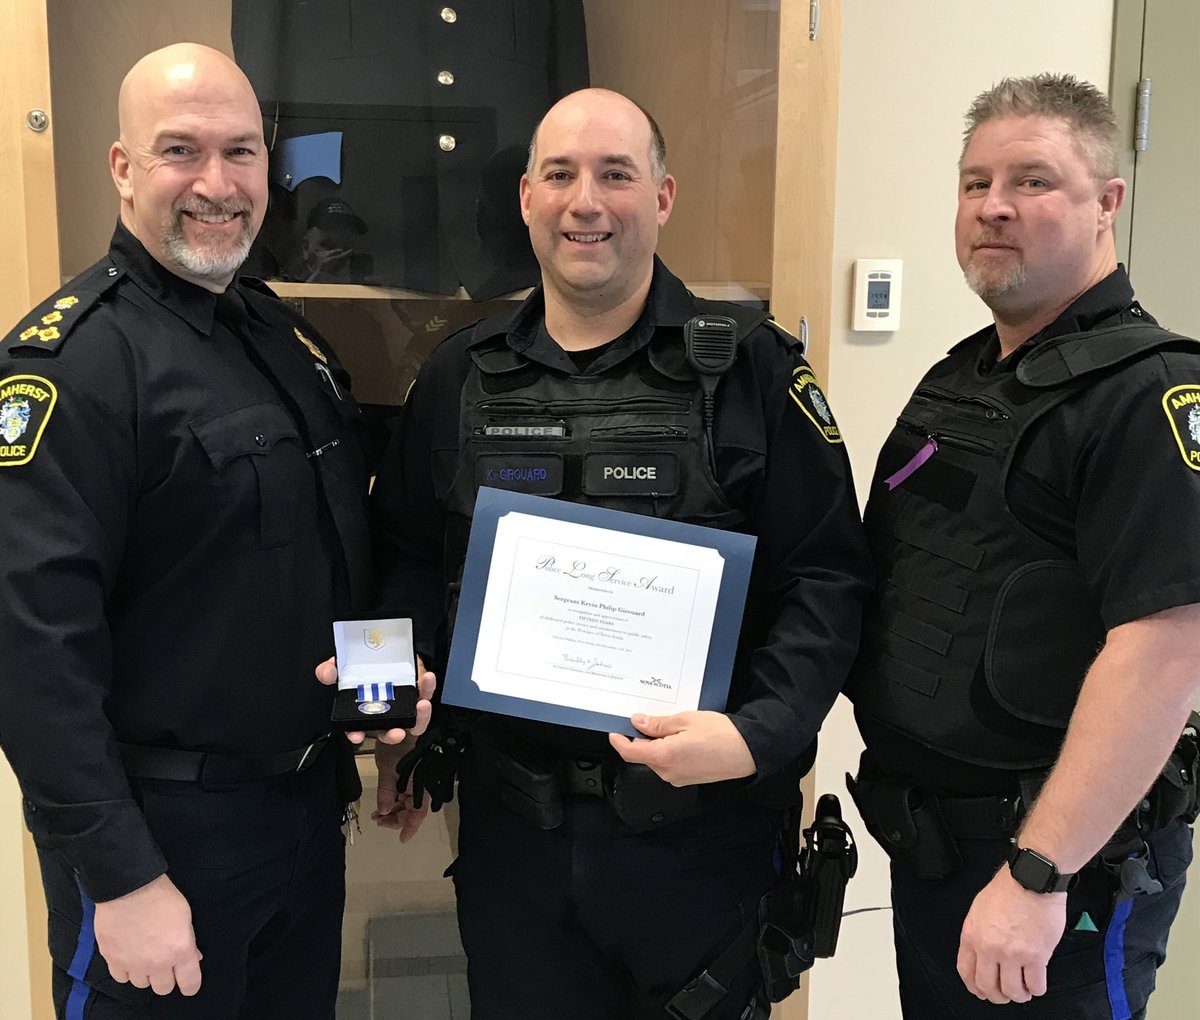 Congrats to Sgt Kevin Girouard on receiving his Provincial 15 Year Long Service Medal.